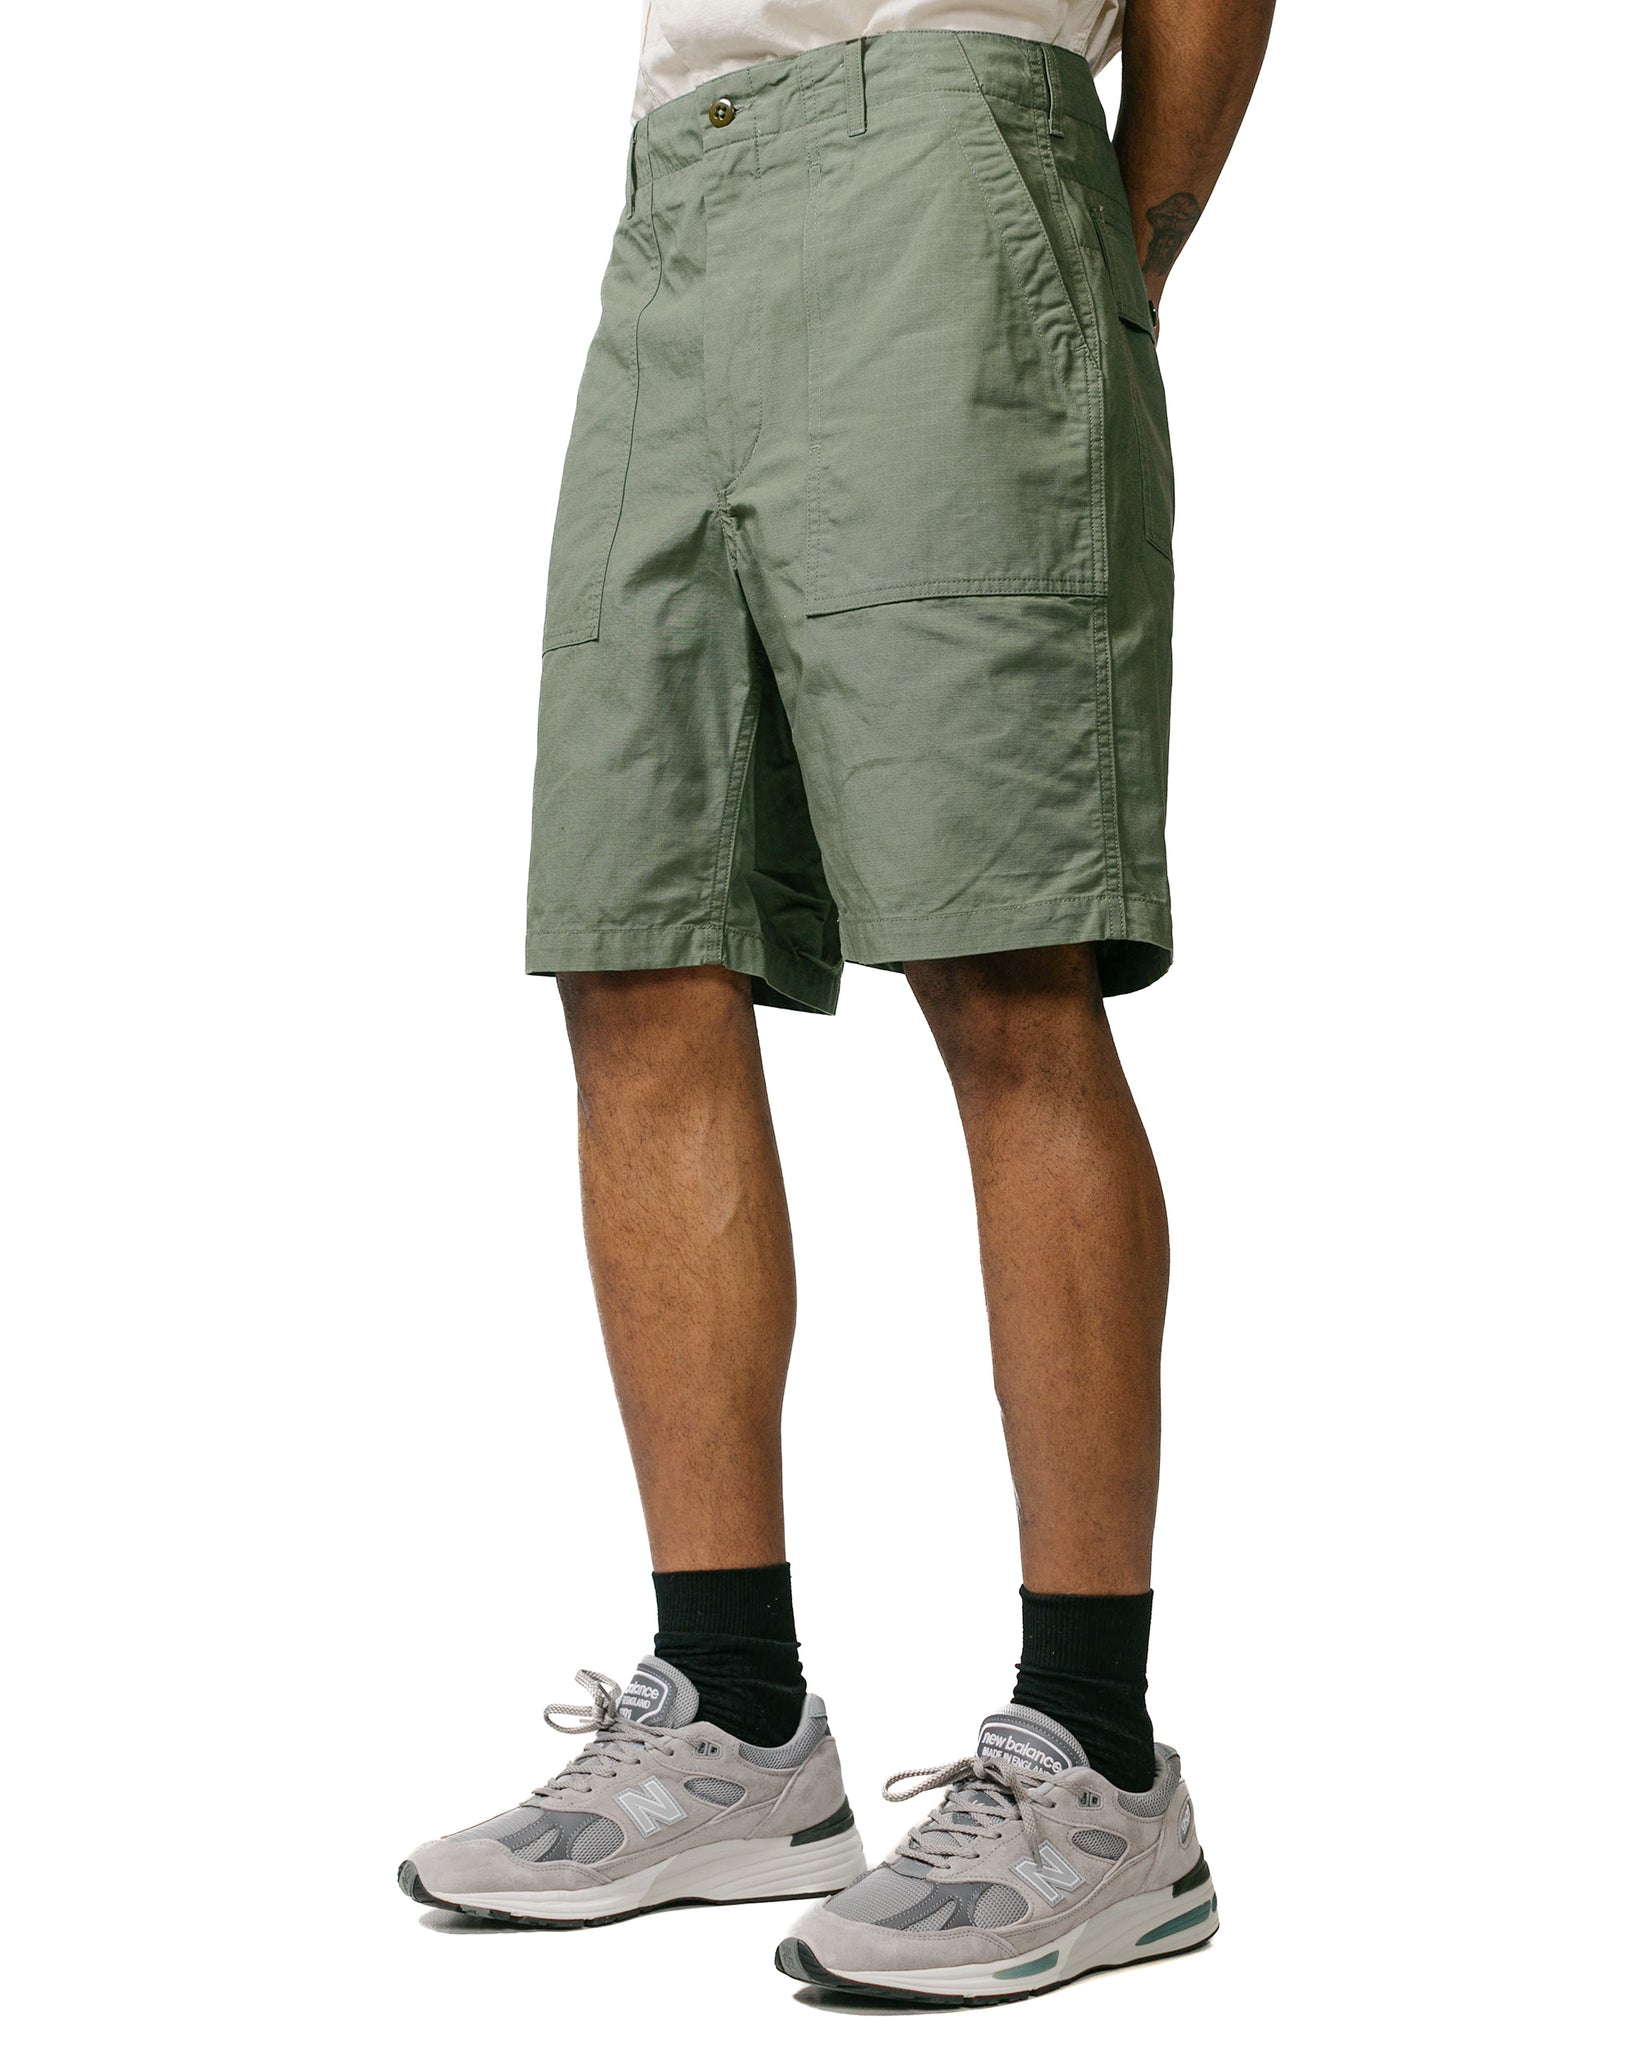 Engineered Garments Fatigue Short Olive Cotton Ripstop model front